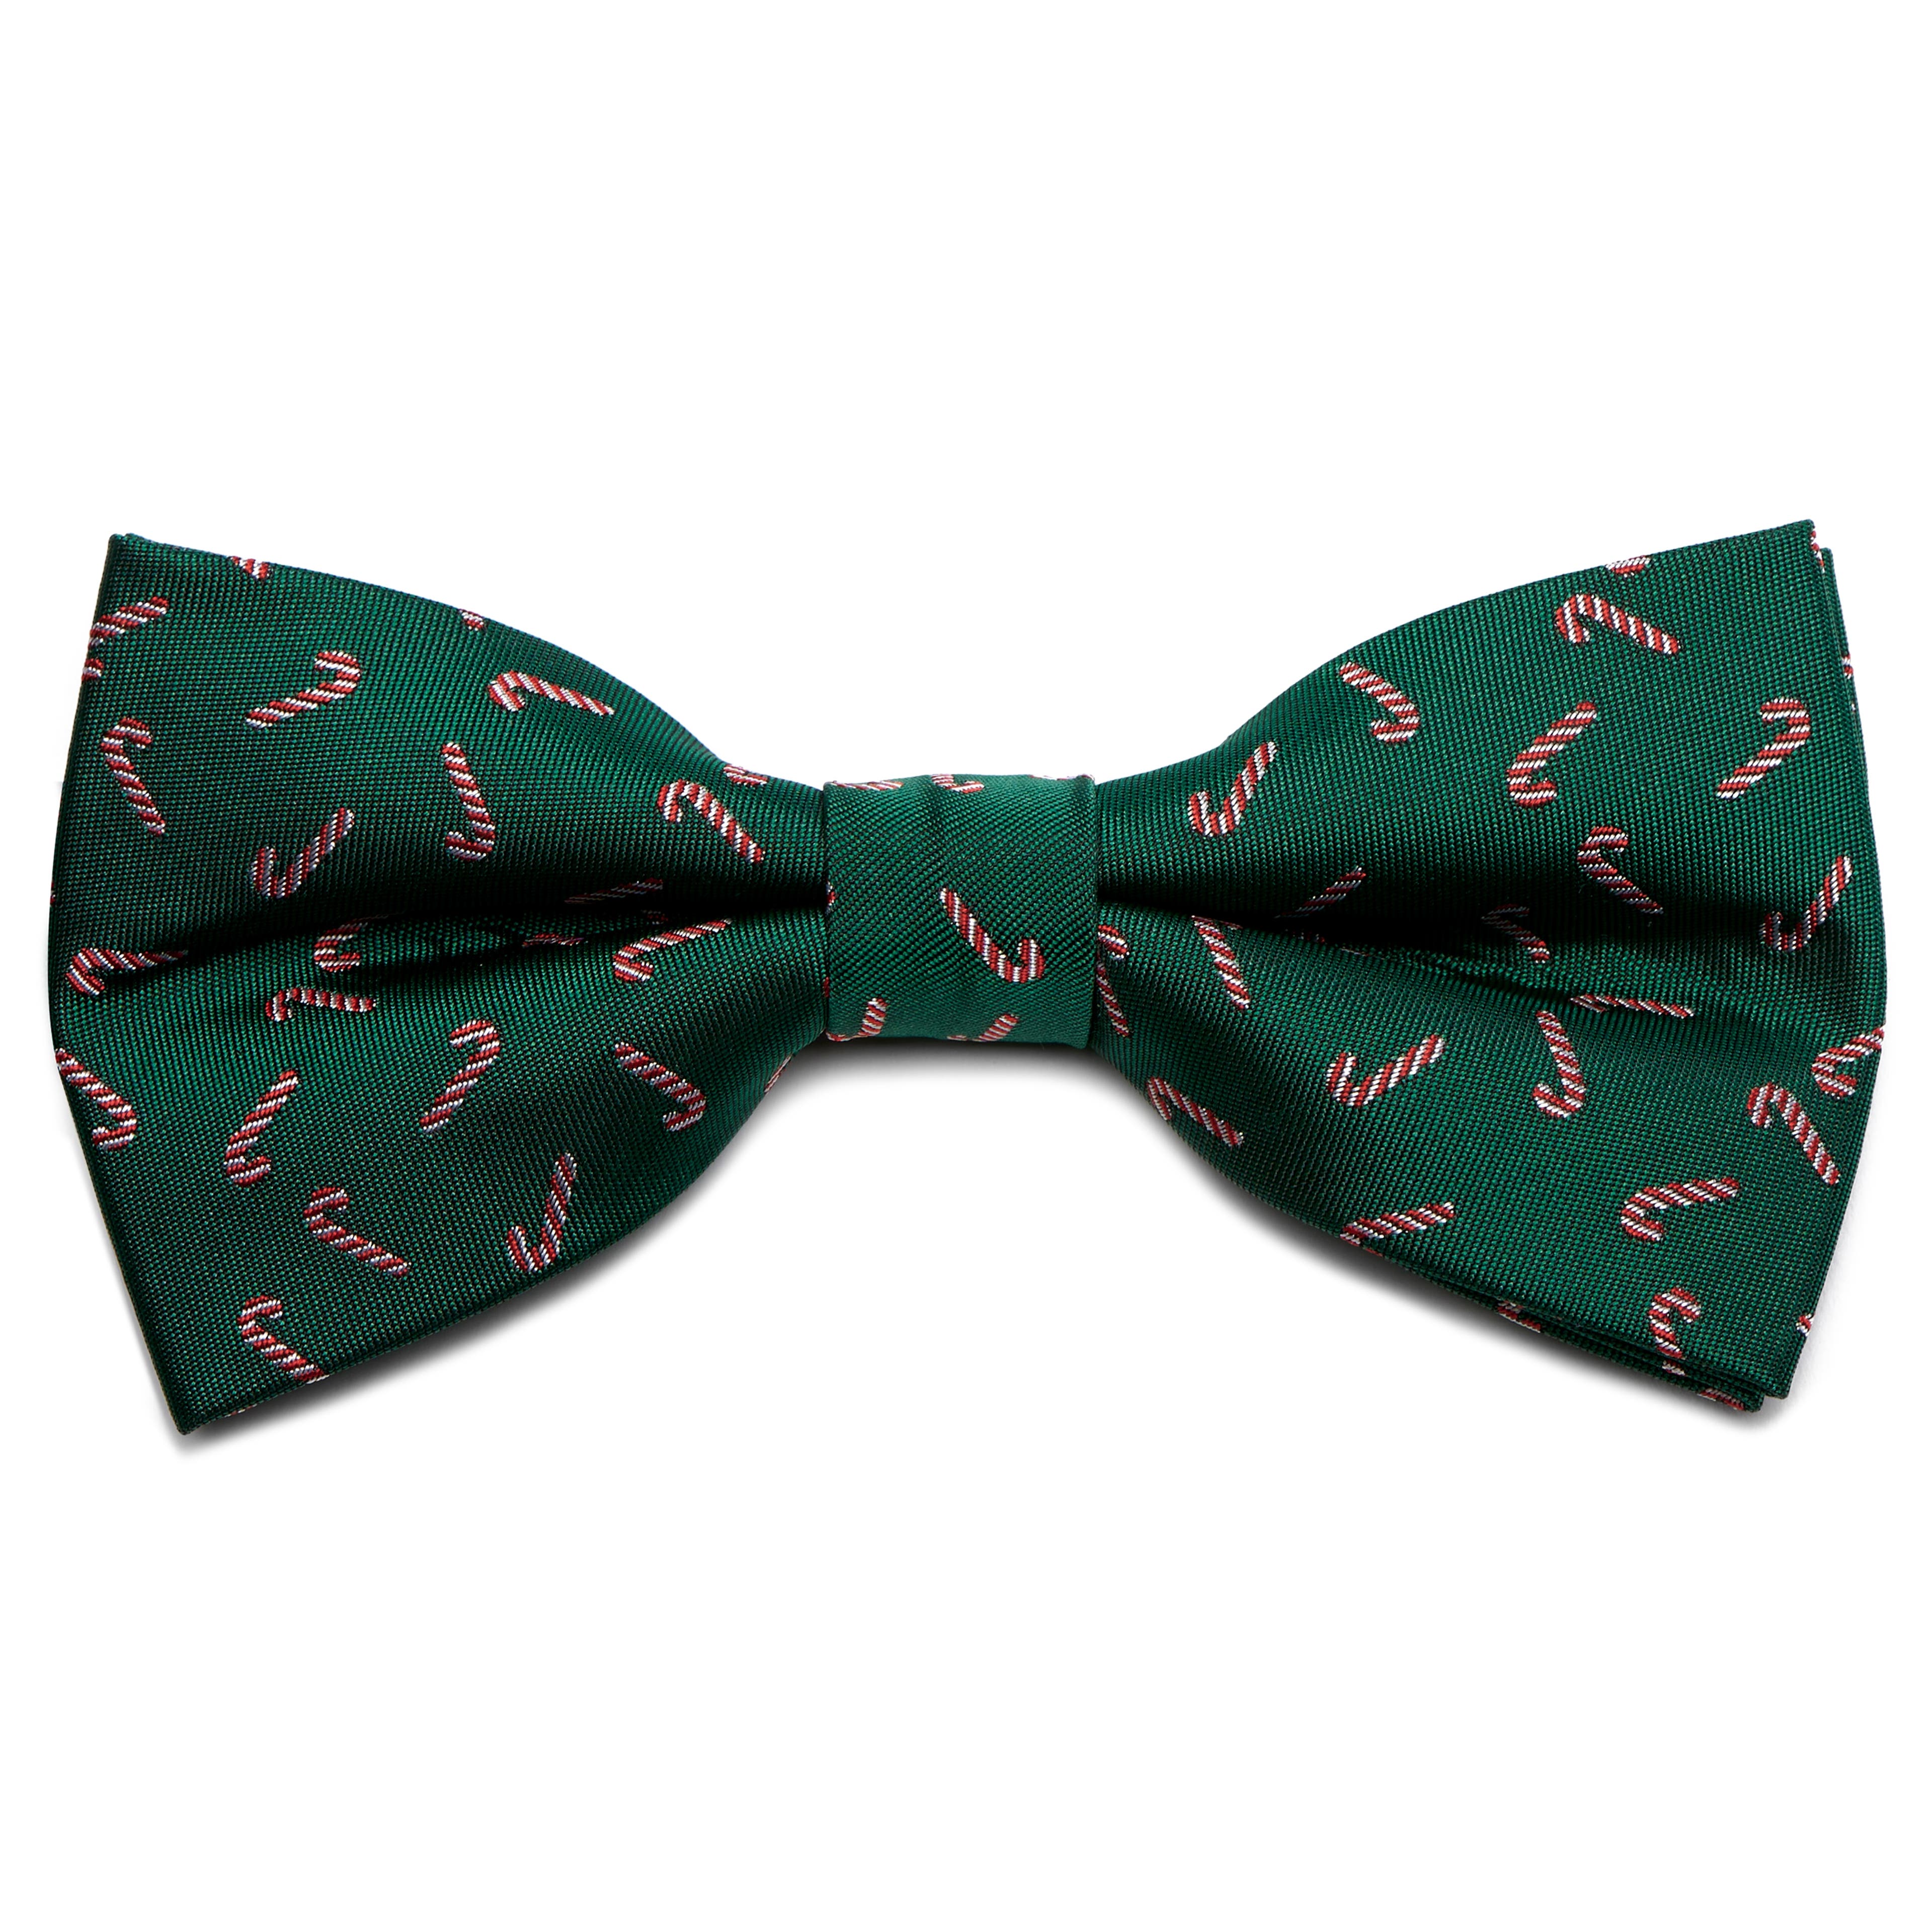 Green Christmas Candy Cane Pre-Tied Bow Tie